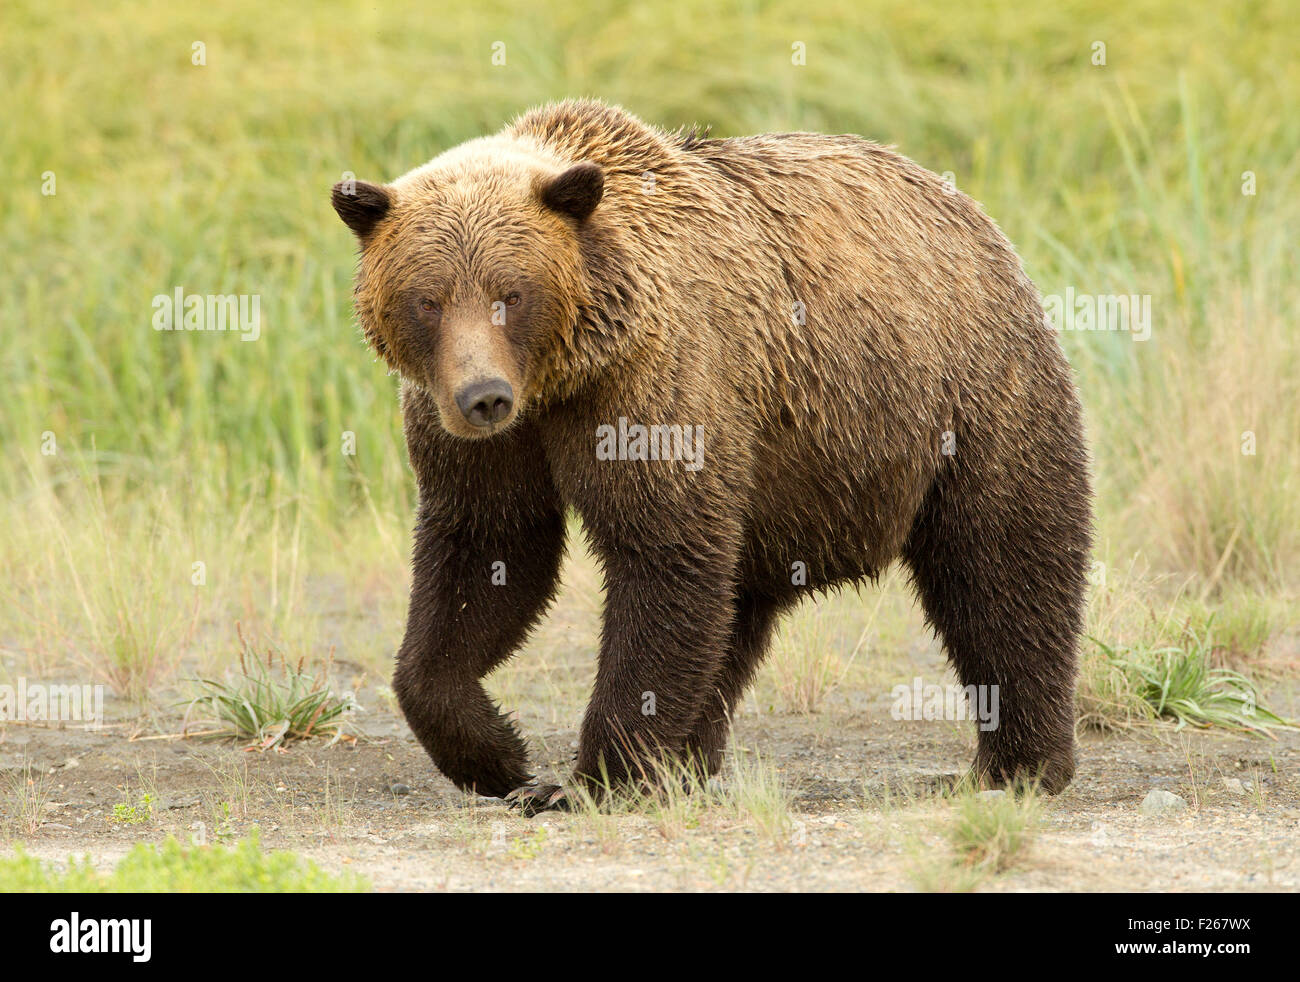 Grizzly Bear Banque D'Images